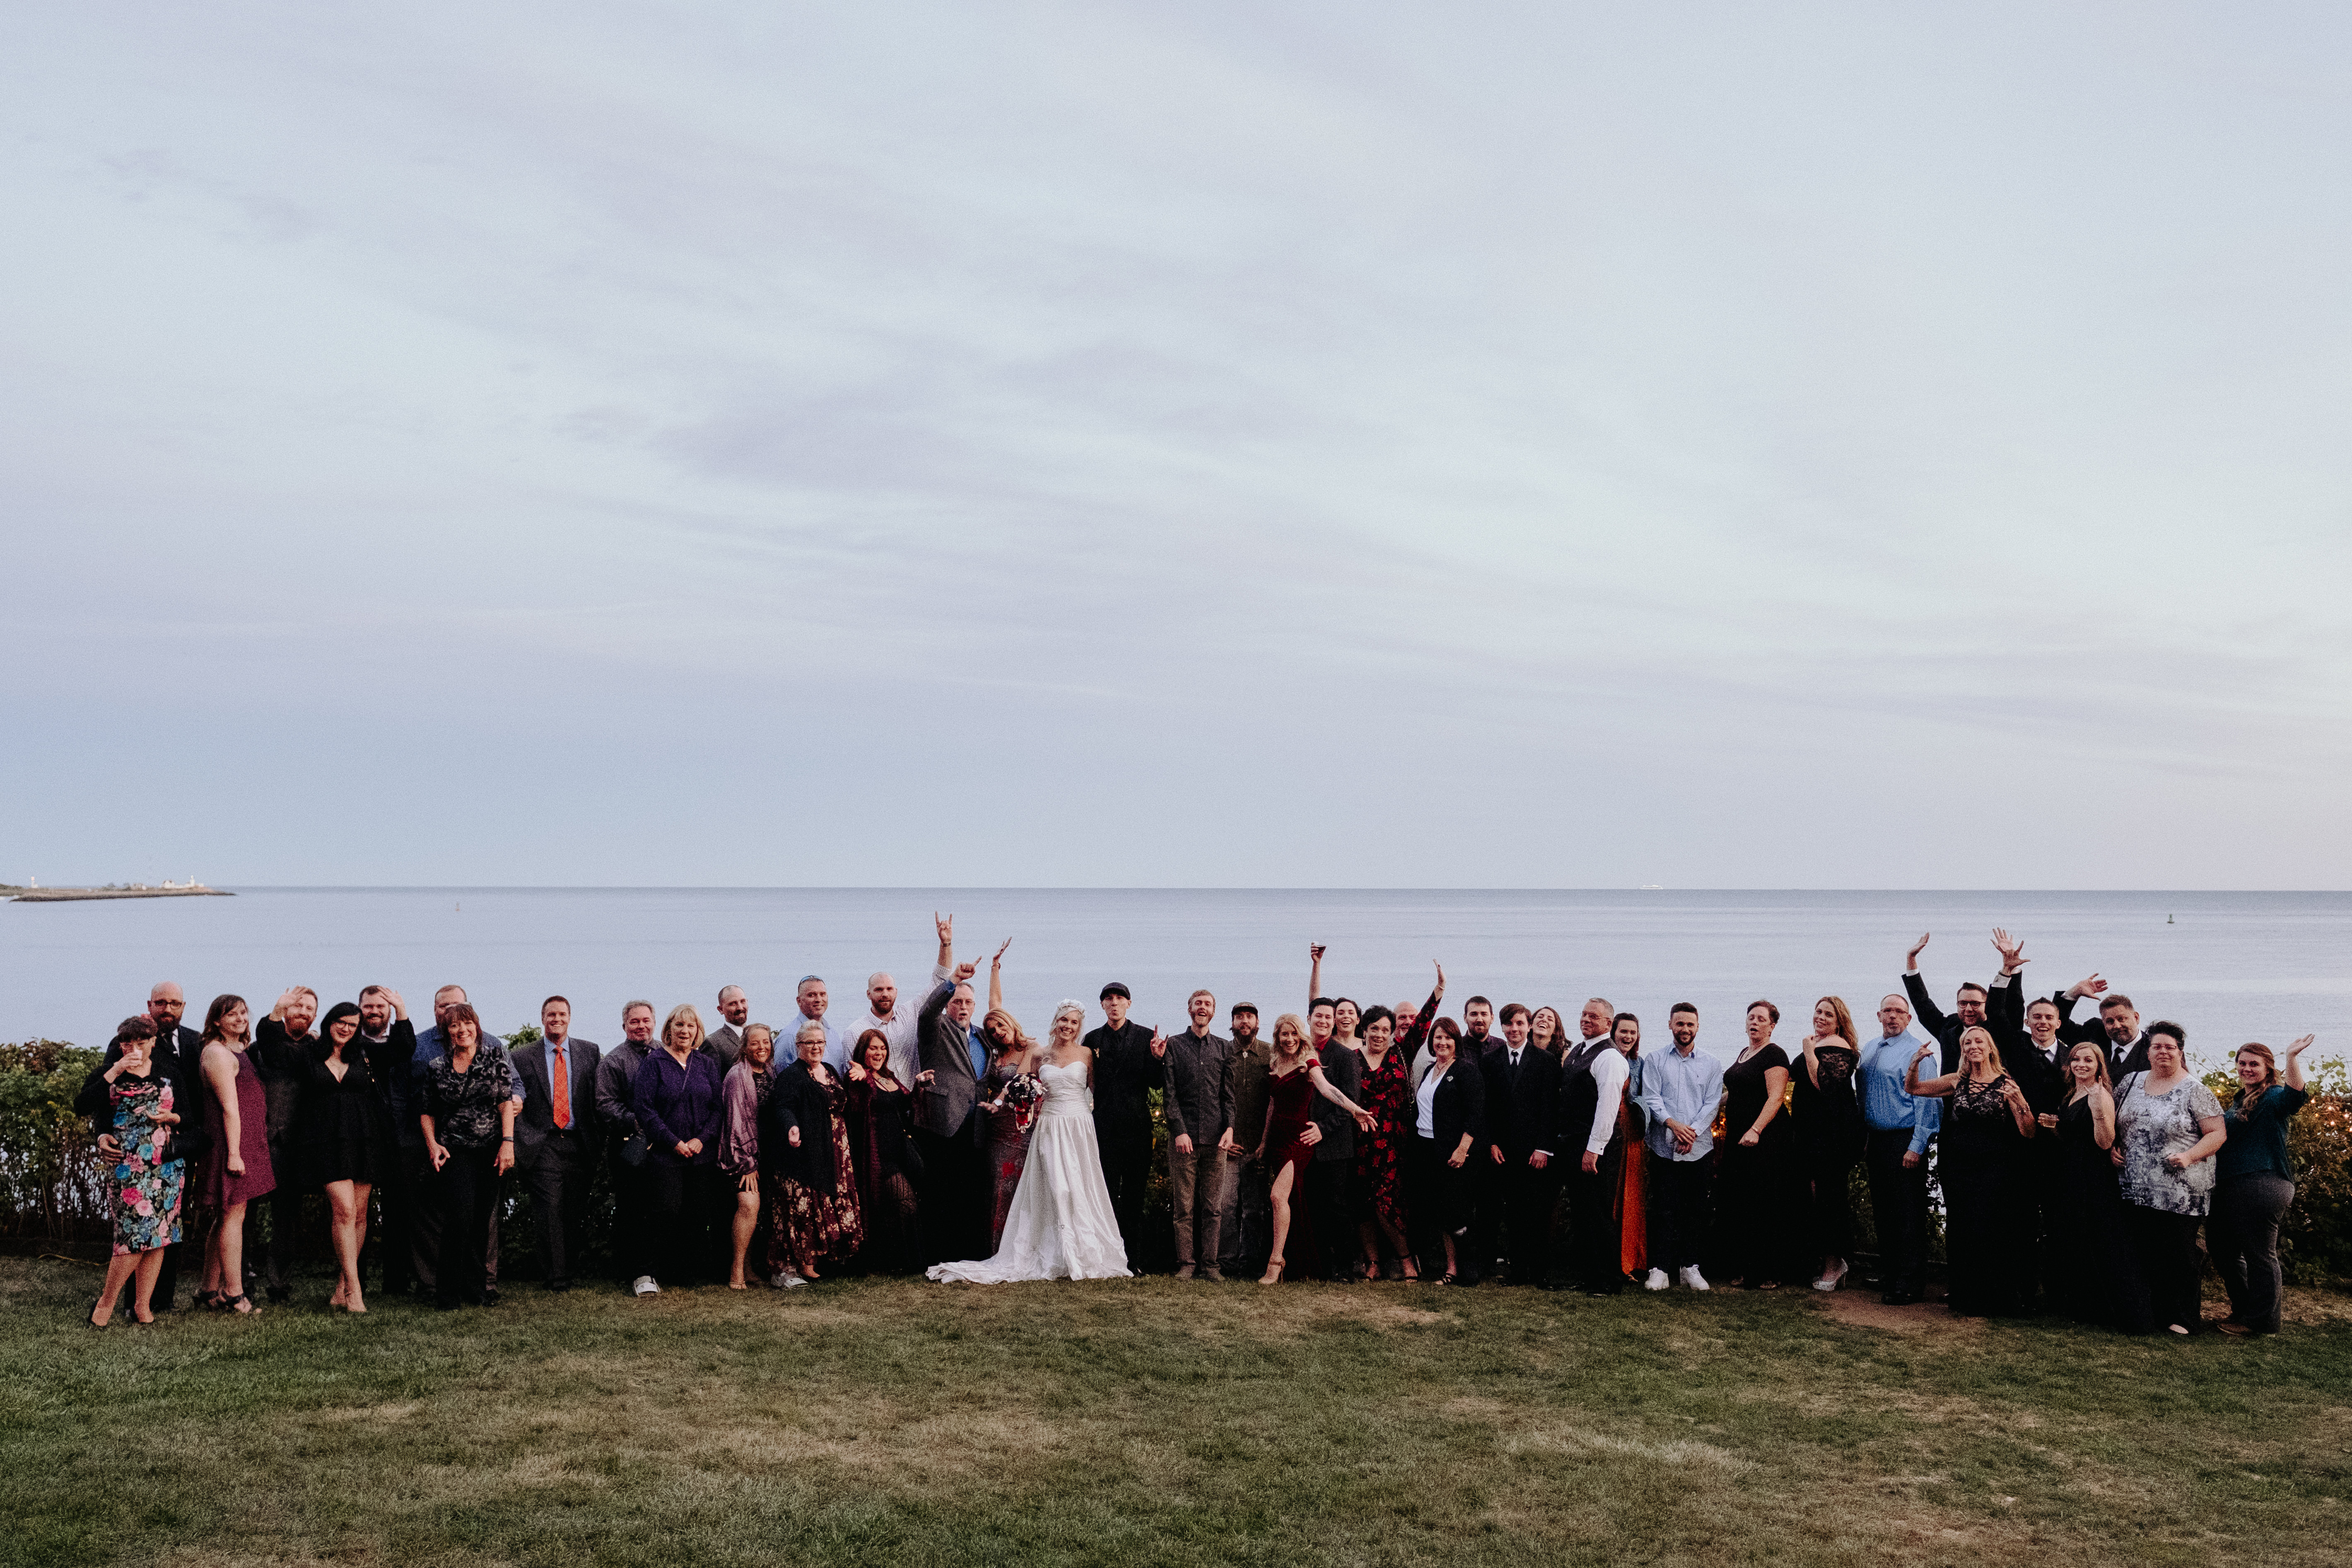 Large group photo of bride and groom with wedding guests at Hammond Castle Museum, Gloucester MA